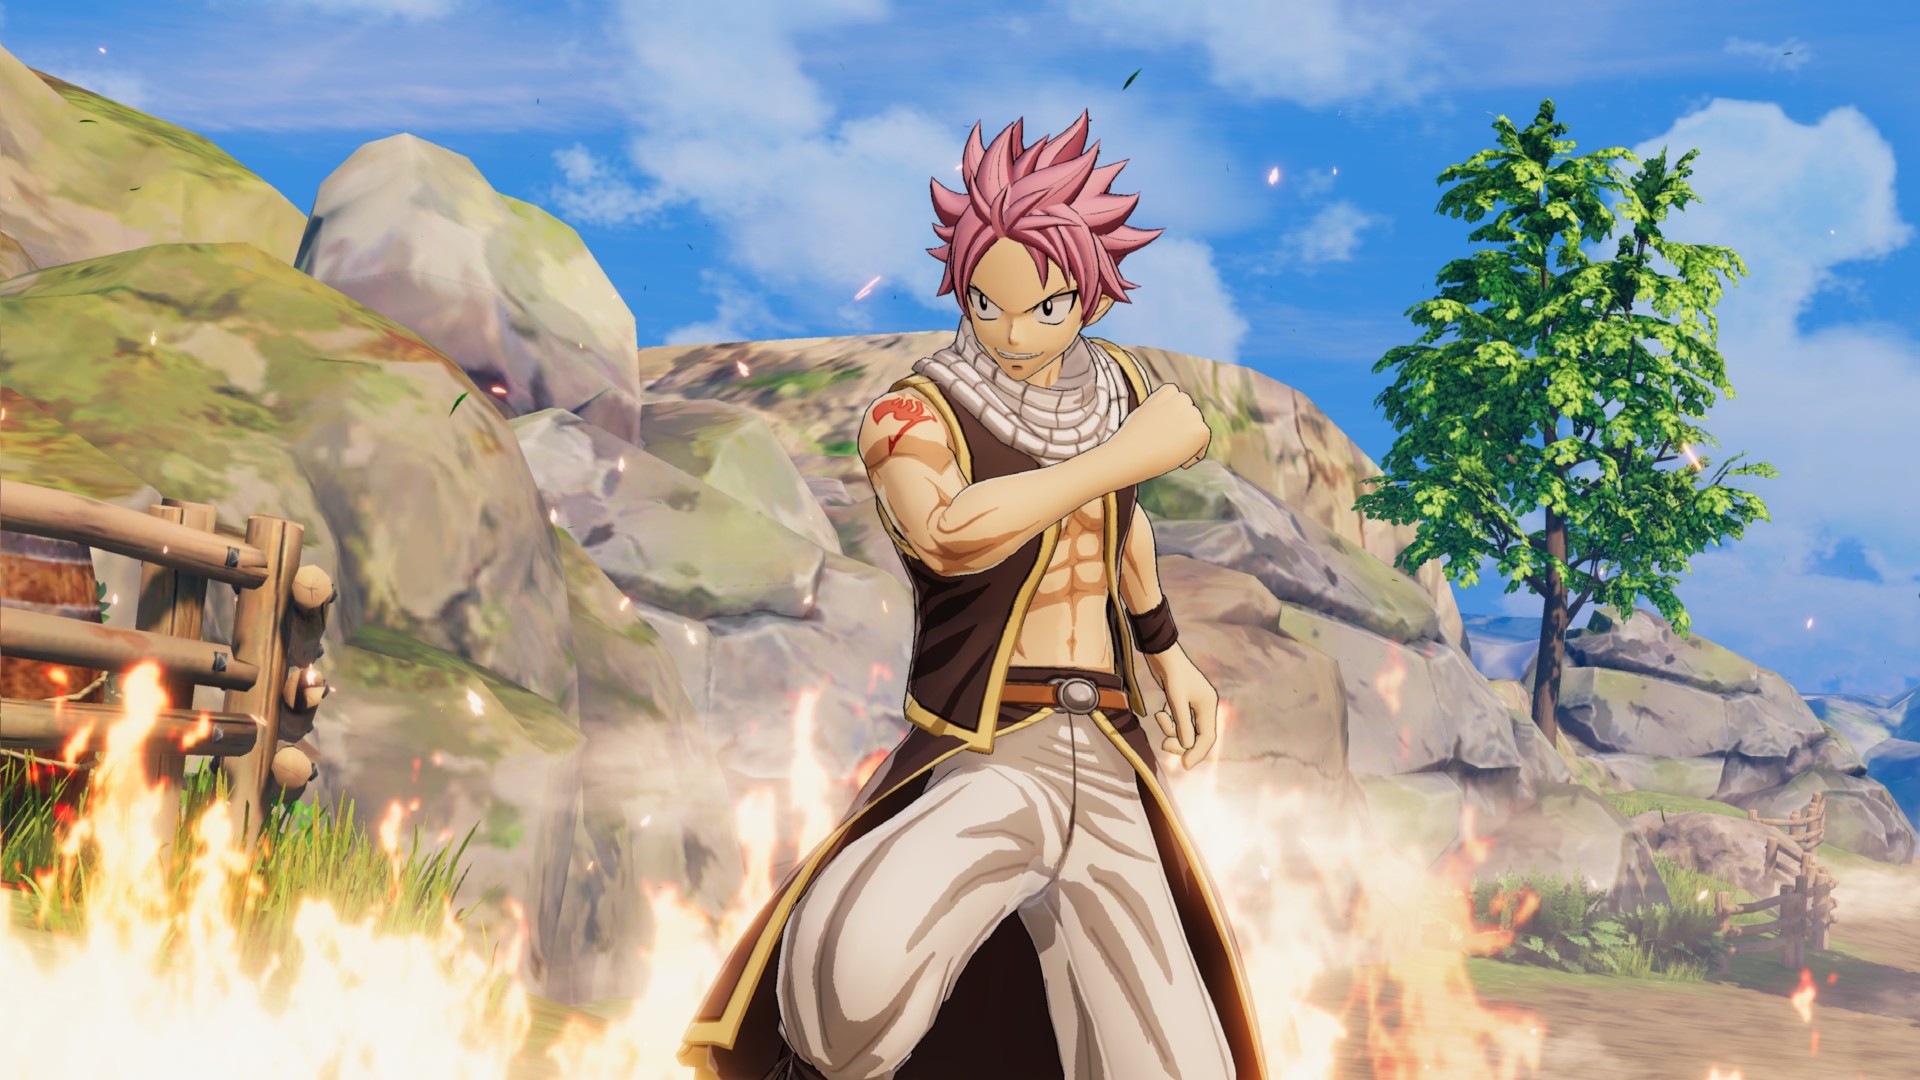 Top 10 Strongest Fairy Tail Characters